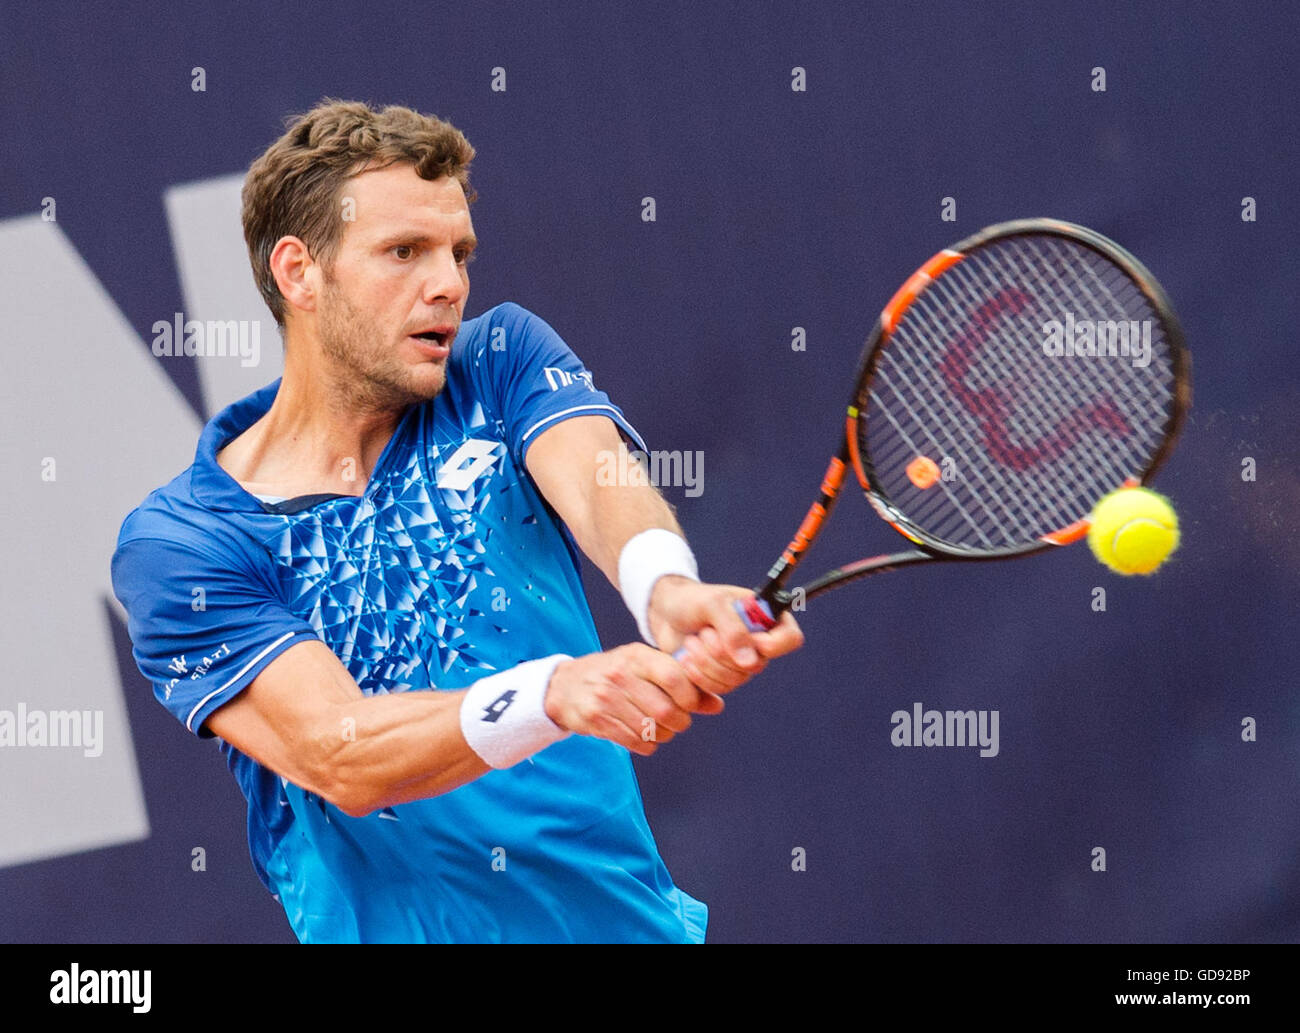 Hamburg, Germany. 13th July, 2016. Paul-Henri Mathieu from France plays against Nicolas Almagro from Spain in the second round of the German Tennis Championships at the tennis stadium Am Rothenbaum in Hamburg, Germany, 13 July 2016. Photo: Daniel Bockwoldt/dpa/Alamy Live News Stock Photo